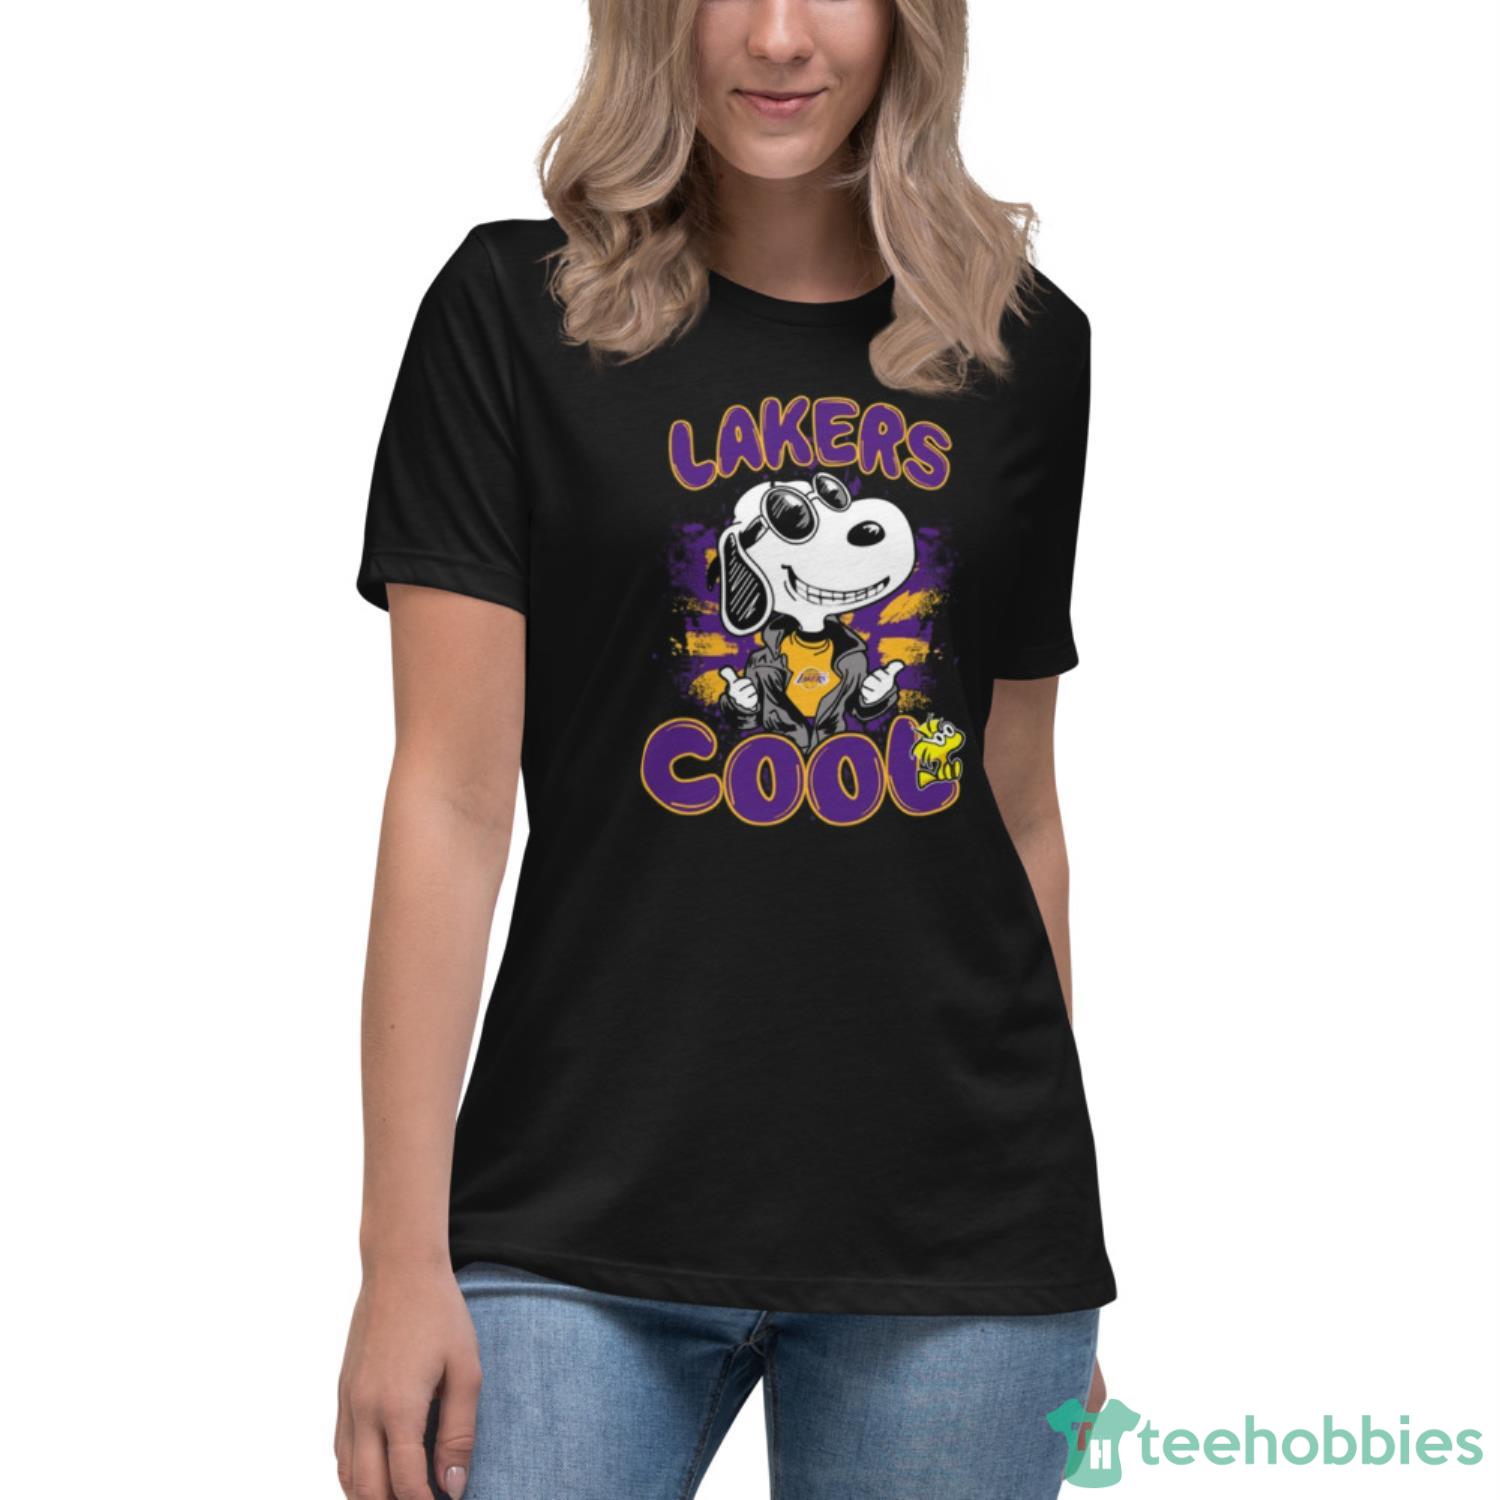 NBA Basketball Los Angeles Lakers Cool Snoopy Shirt T Shirt - Womens Relaxed Short Sleeve Jersey Tee